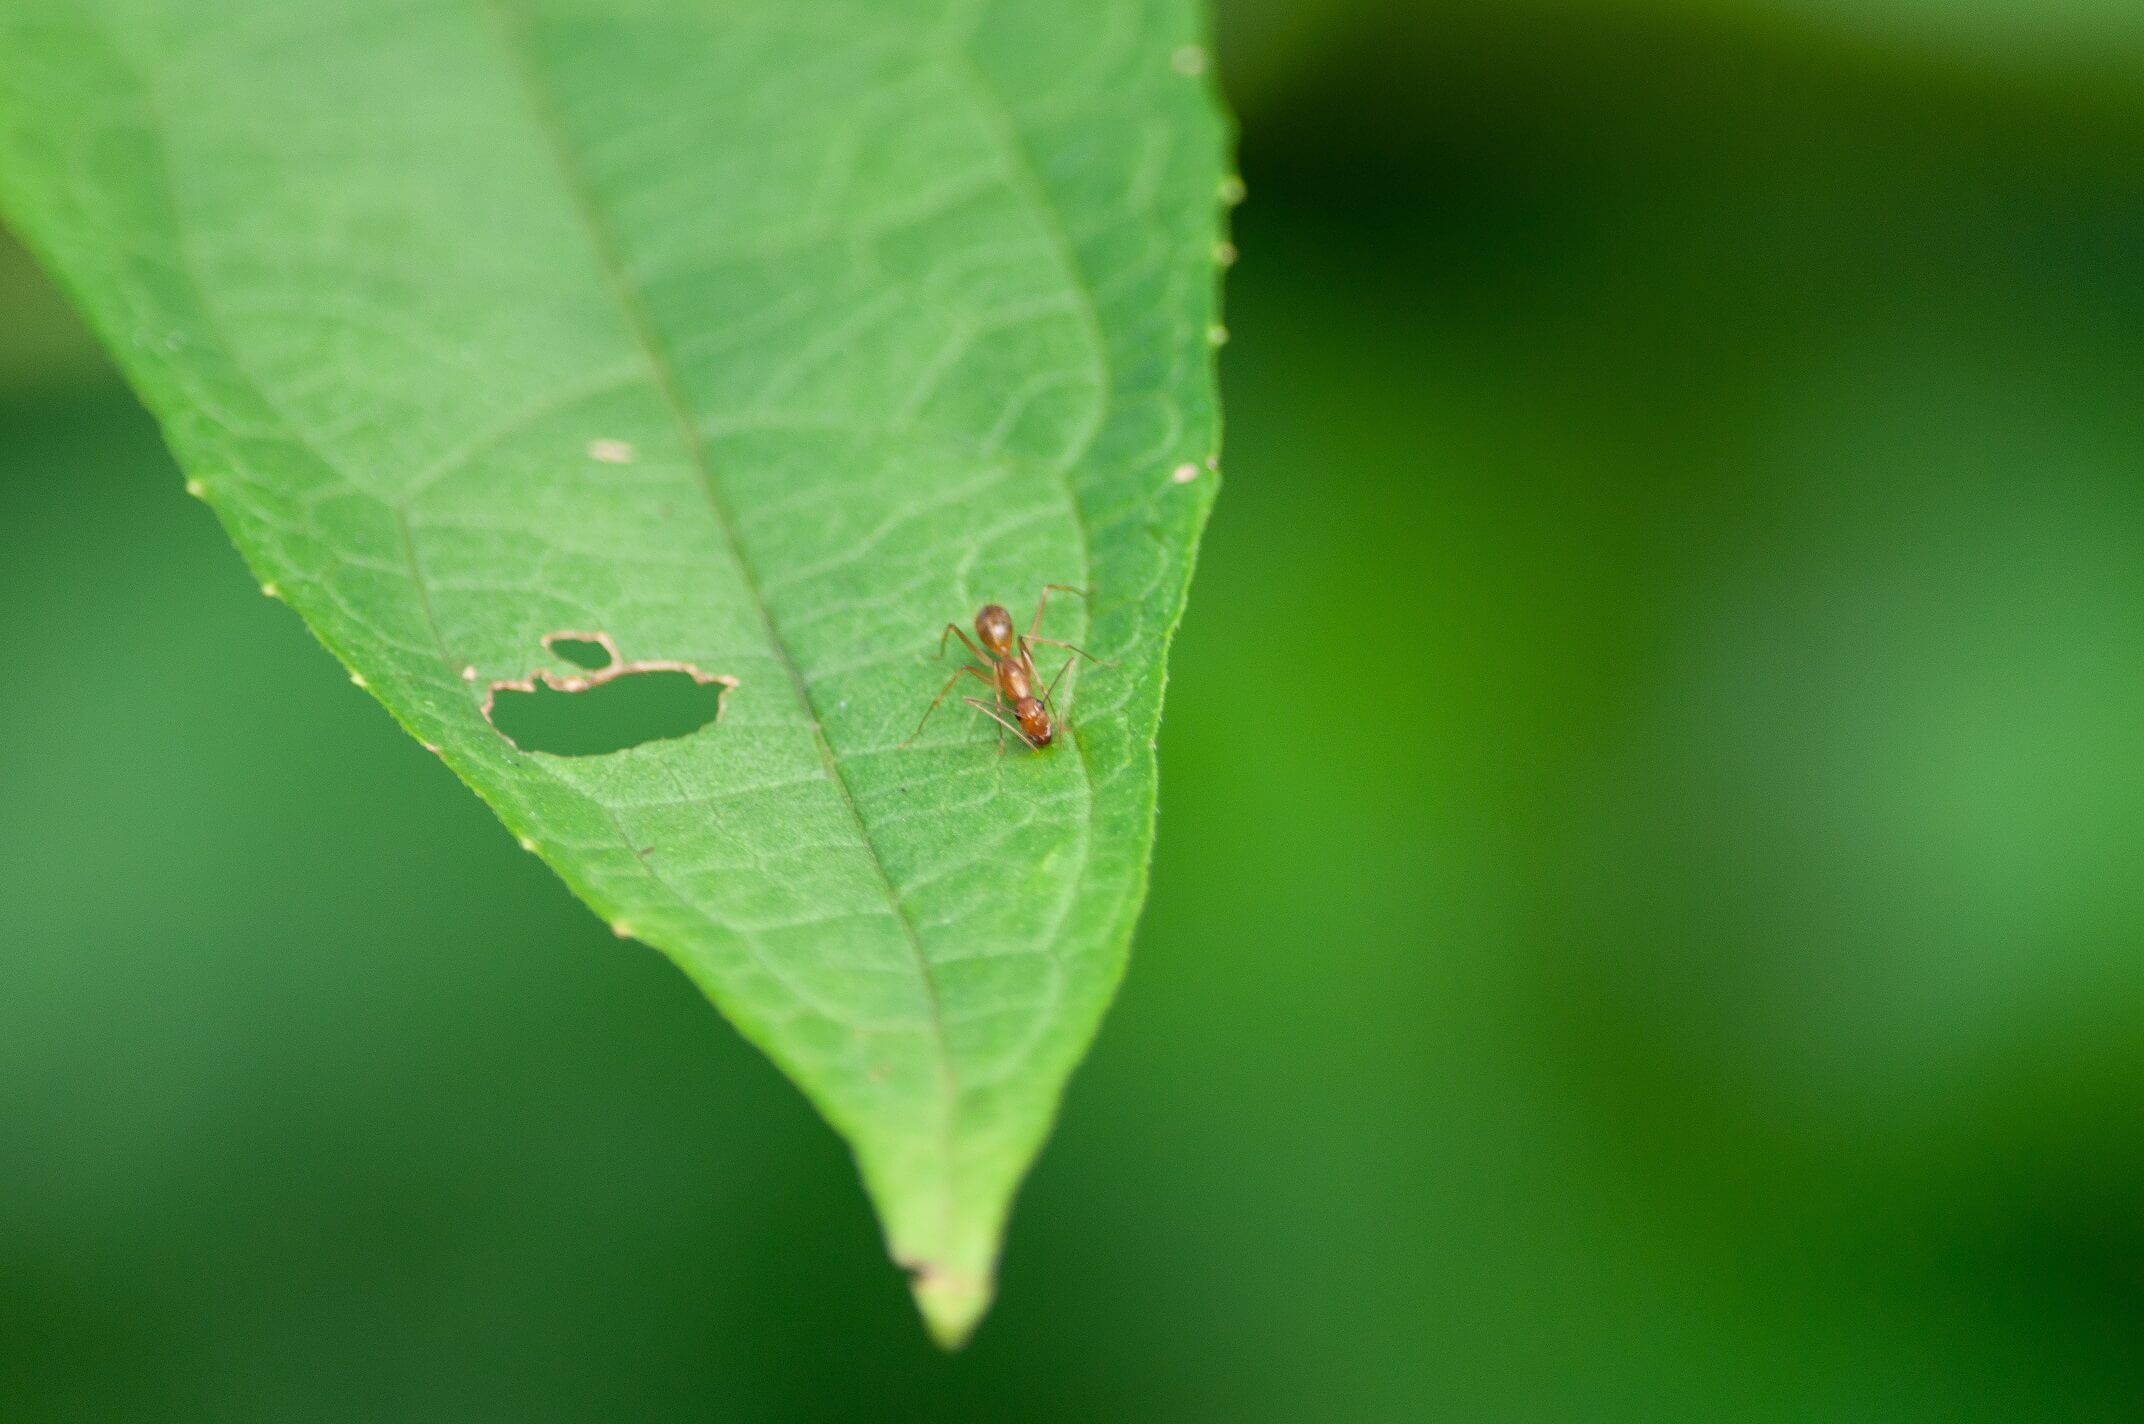 A photo of a leaf that has been eaten by ants